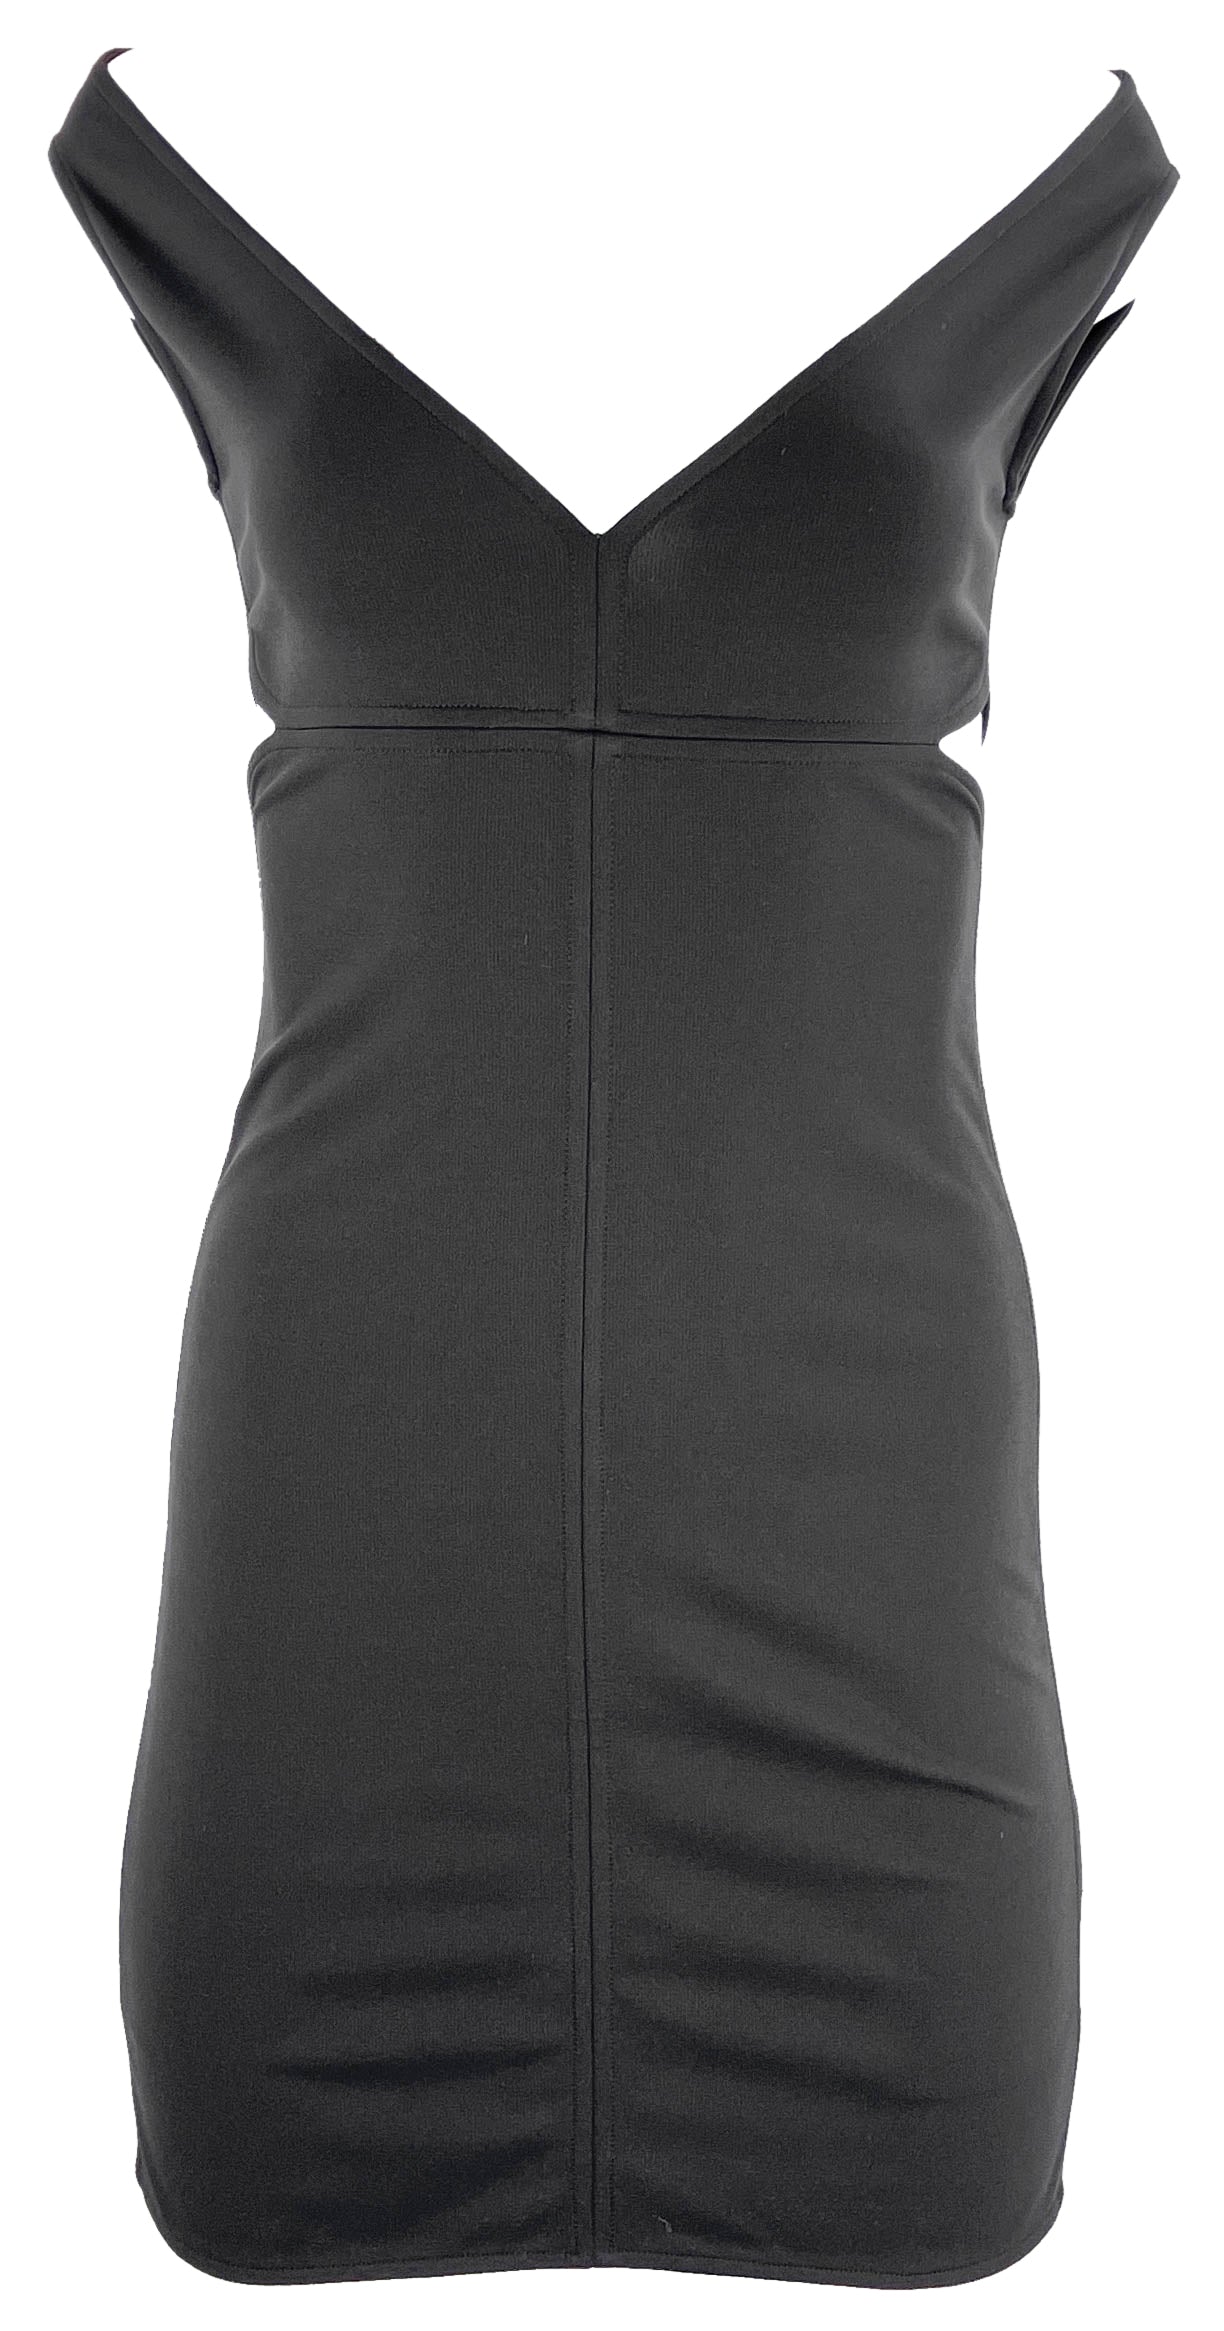 Courrēges Cut-Out Mini Dress in Black - Discounts on Courrēges at UAL